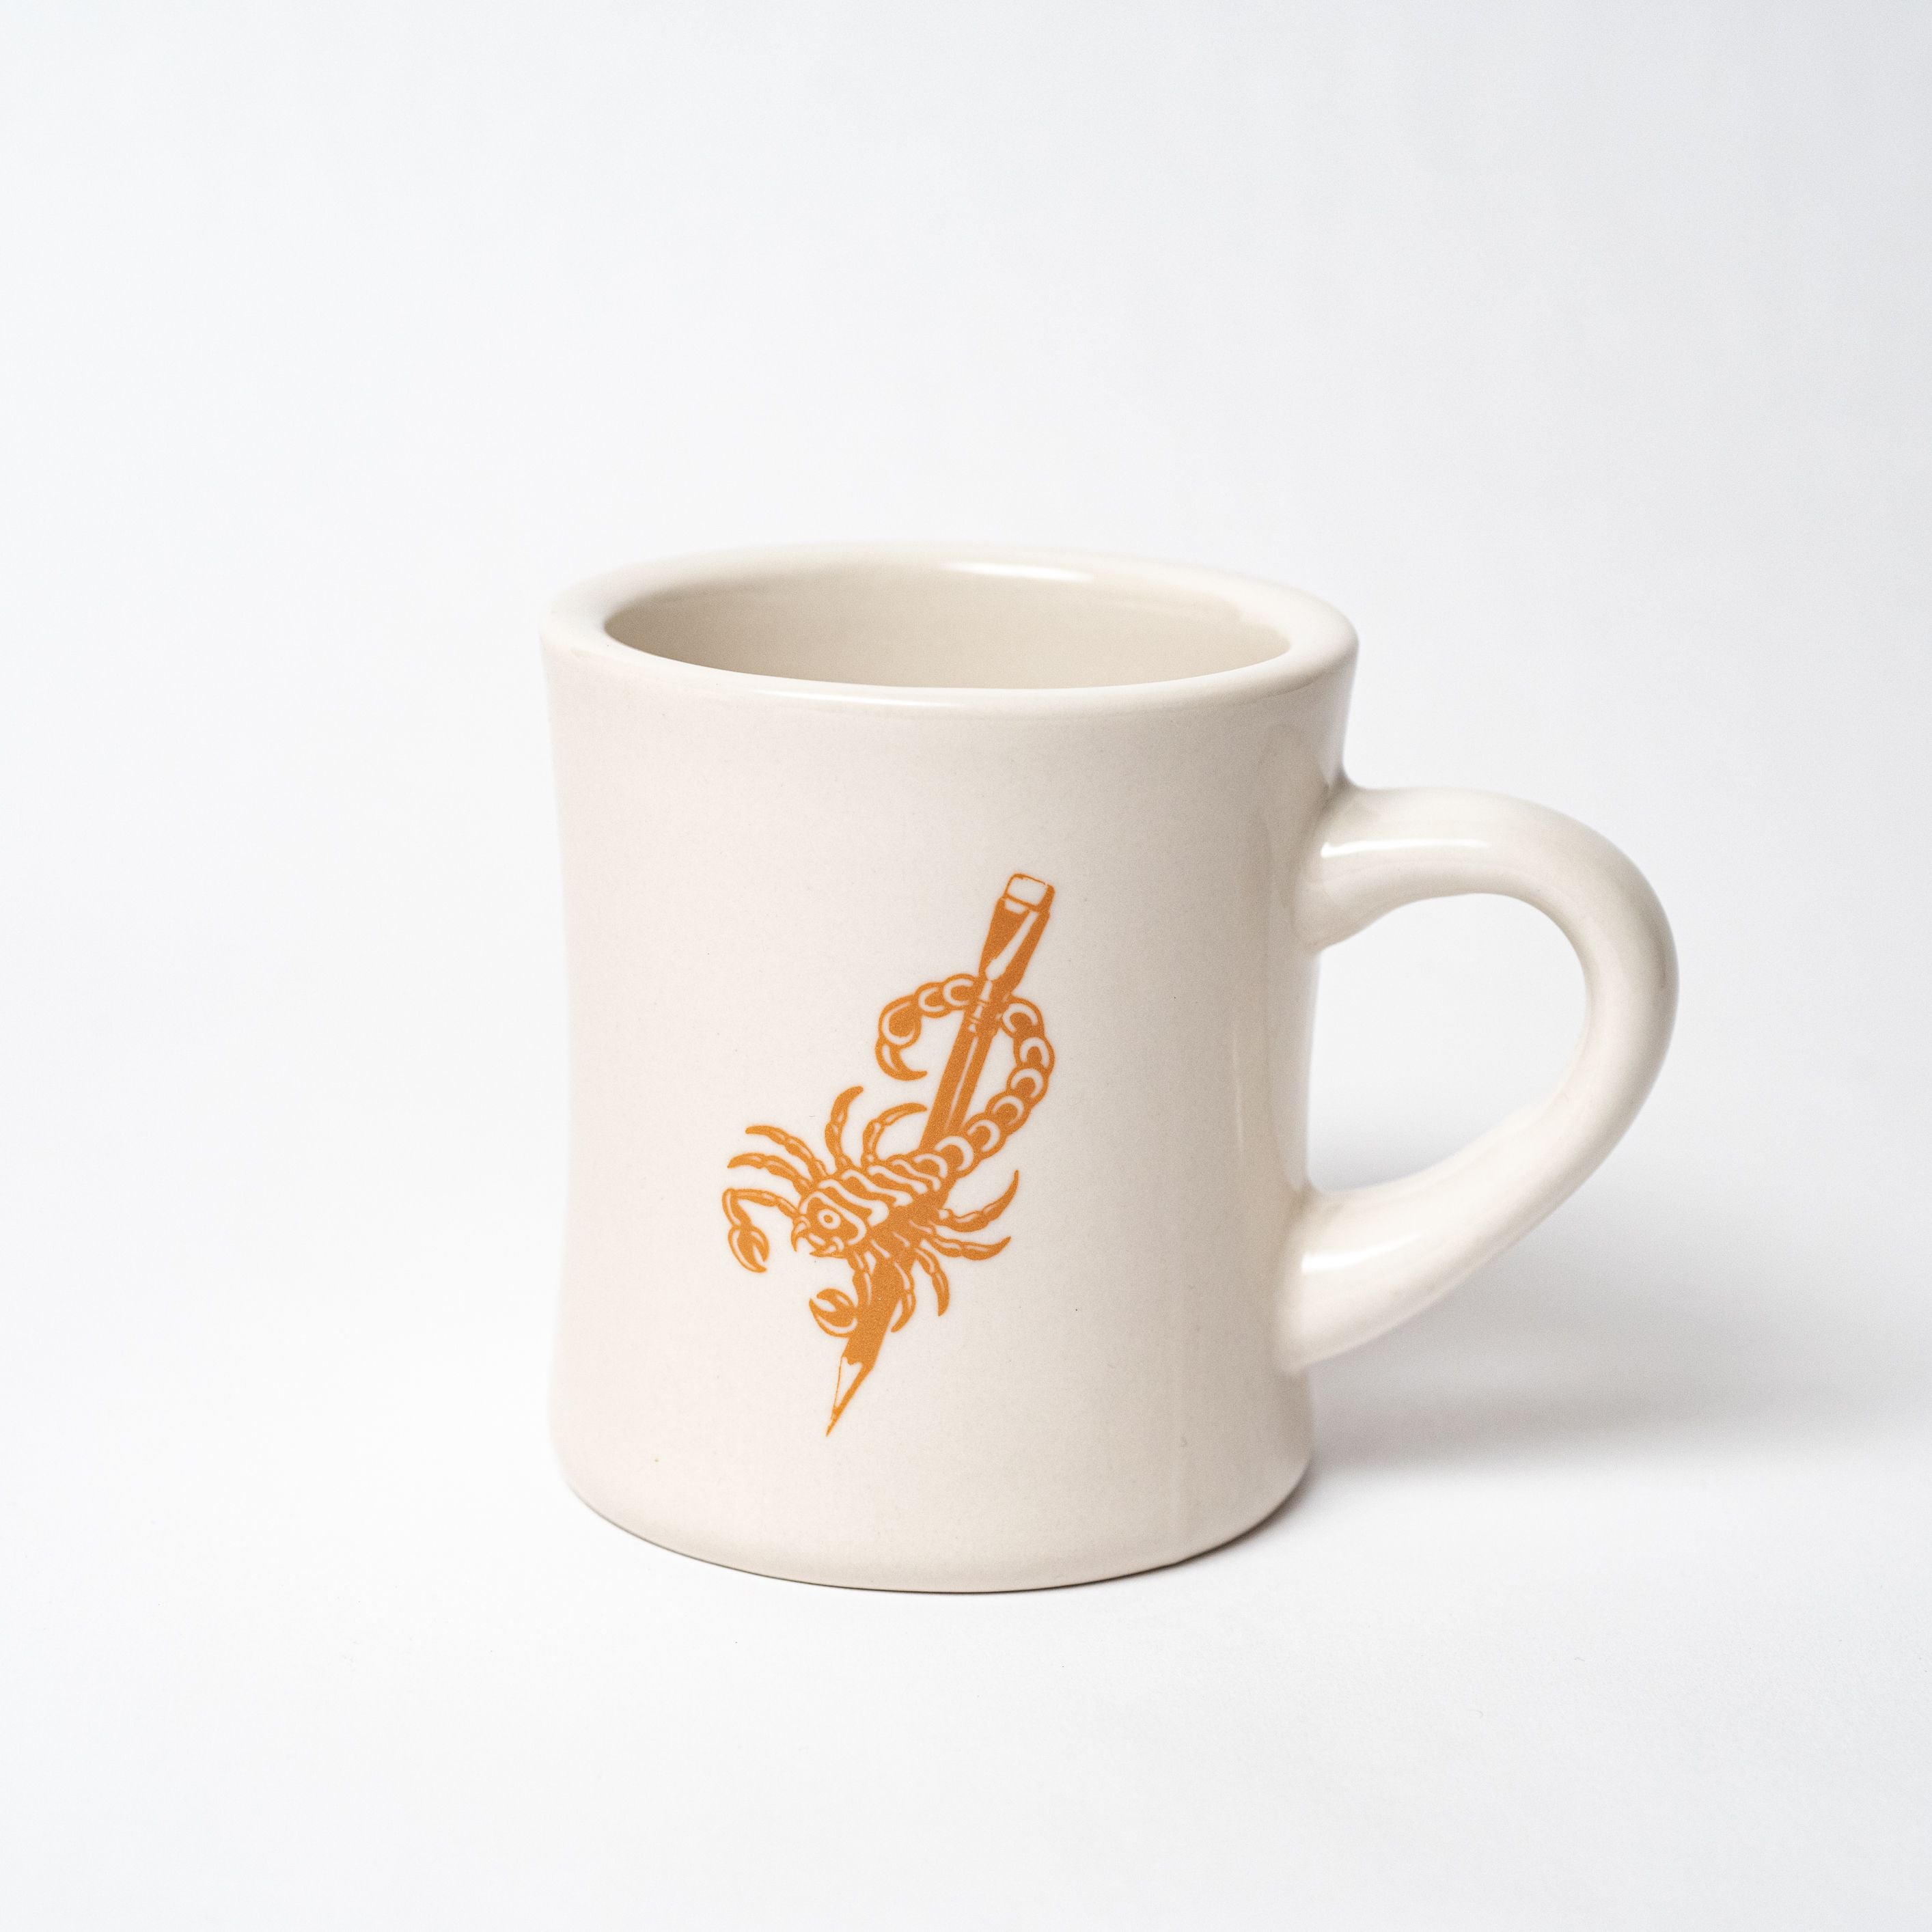 A Blackwing x Timeless Coffee Mug from Oakland.